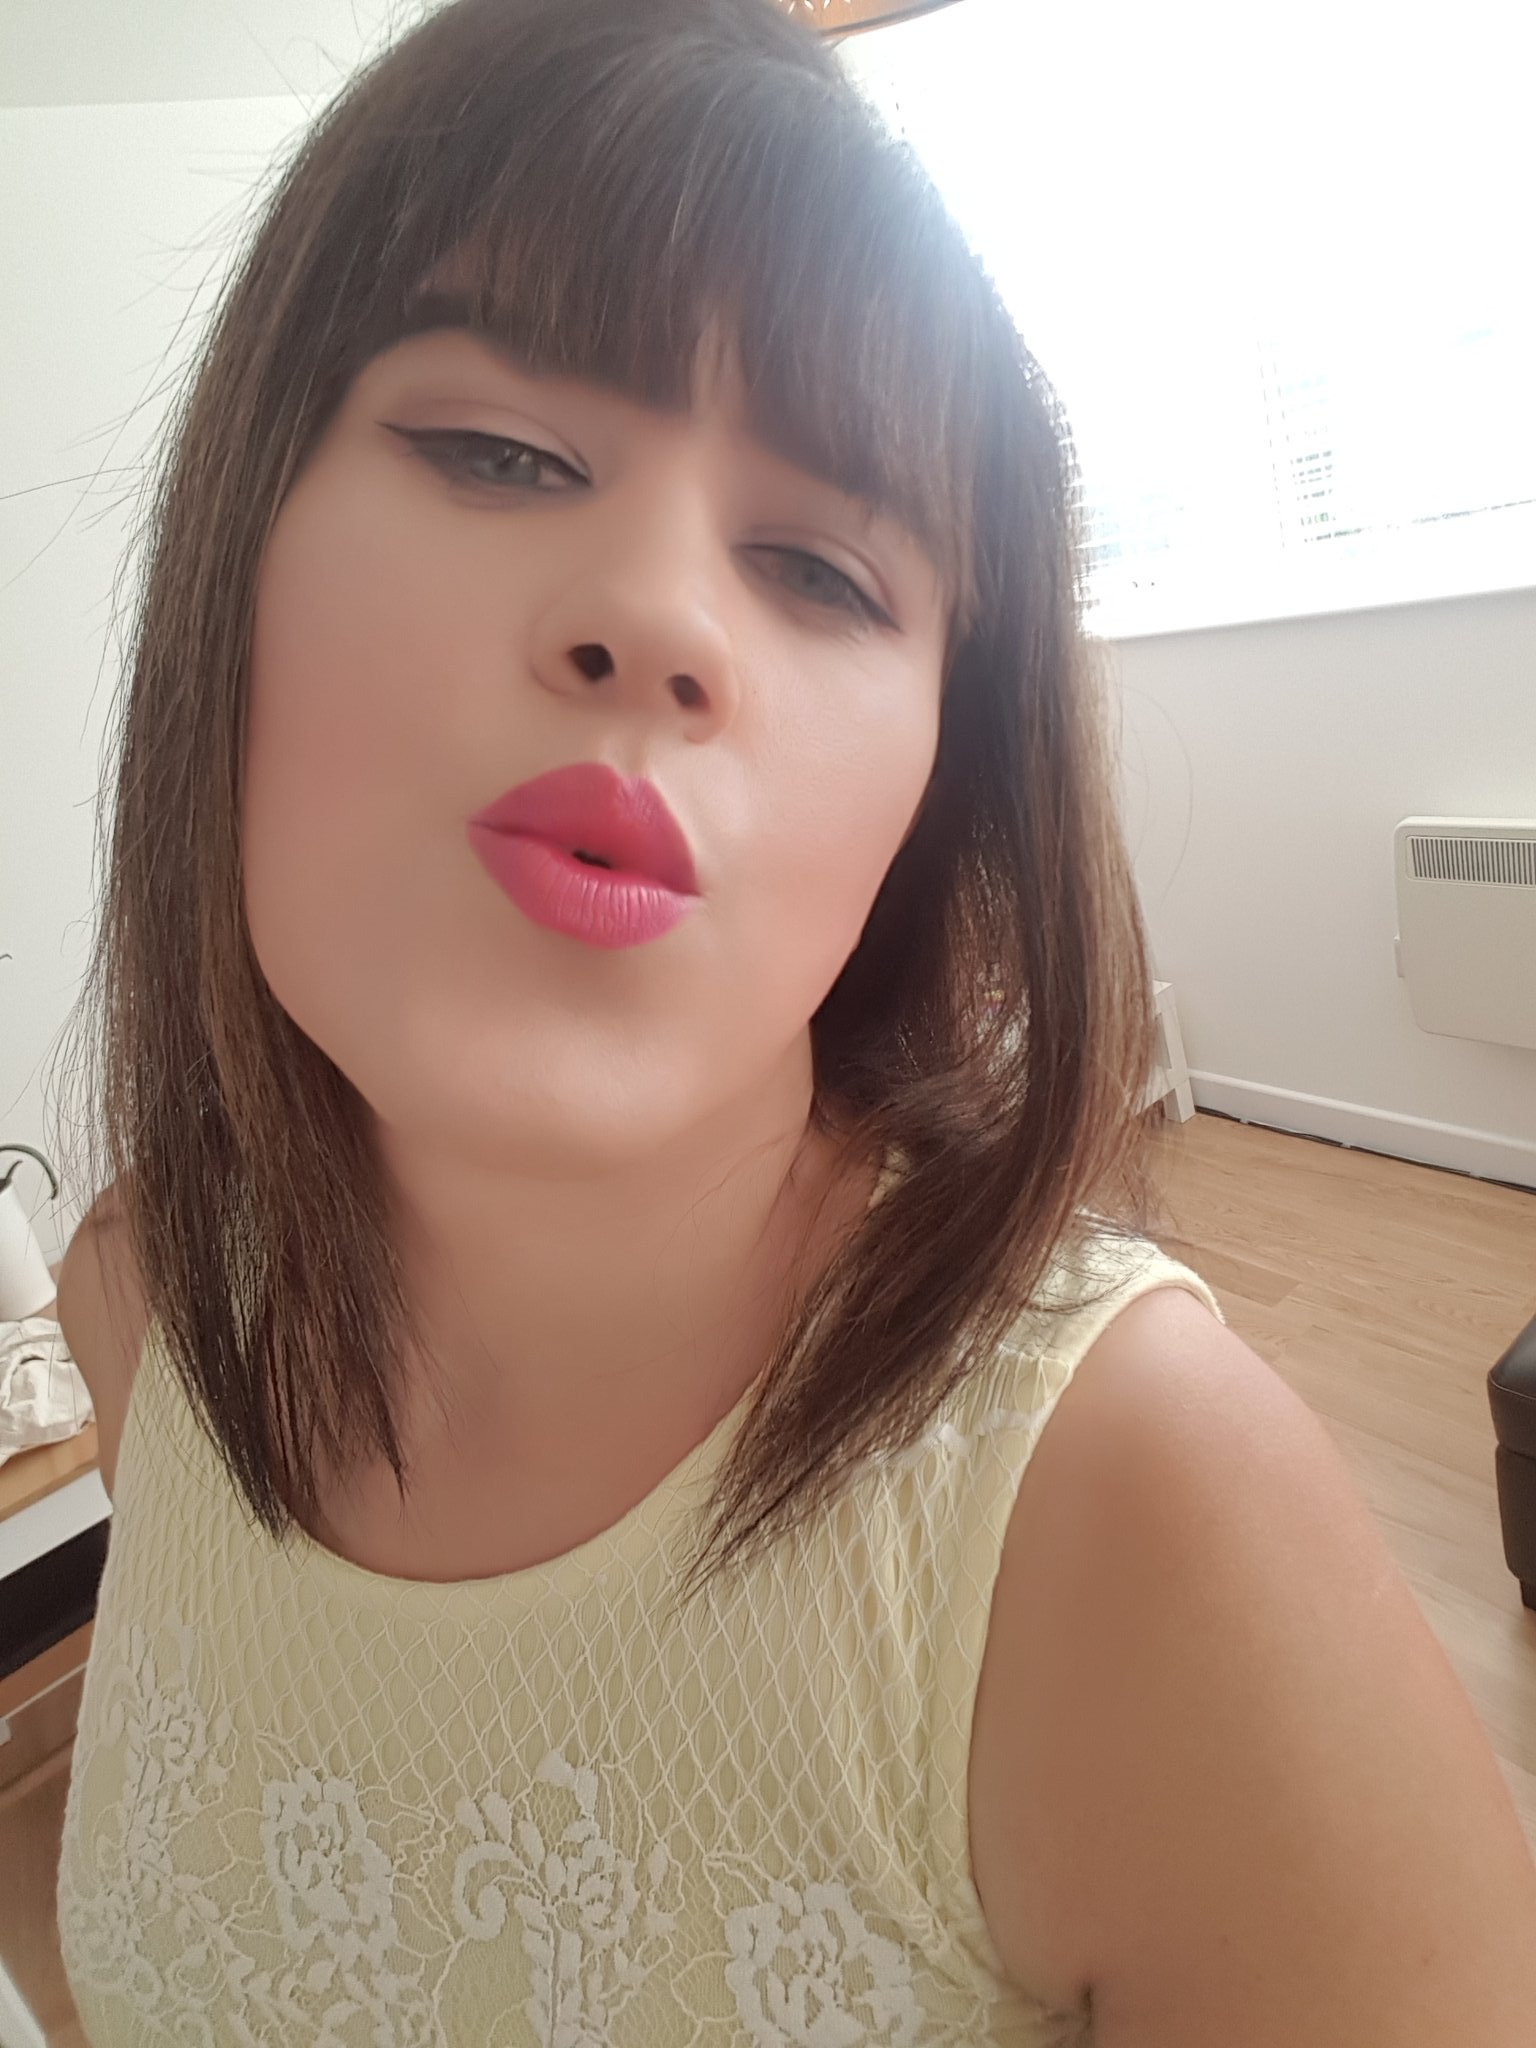 Davina Trans Girl X On Twitter Morning Twitter X Have A Wonderful Day